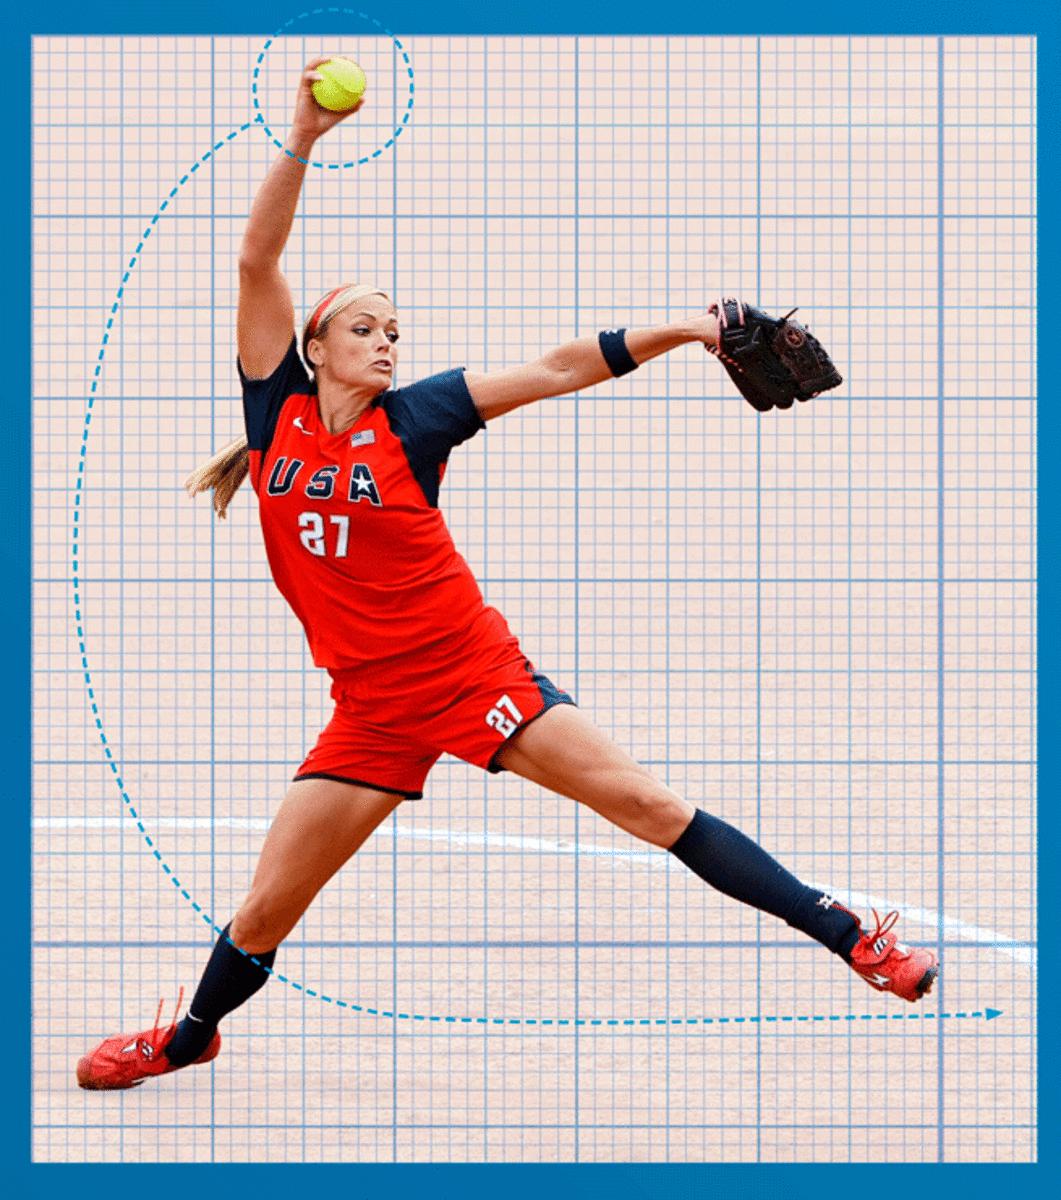 Olympic champion softball pitcher Jennie Finch's fastball takes the same amount of time to reach the plate as a 95-MPH pitch from an MLB mound. But MLB hitters aren't used to the motion and rotation and can't pick it up.